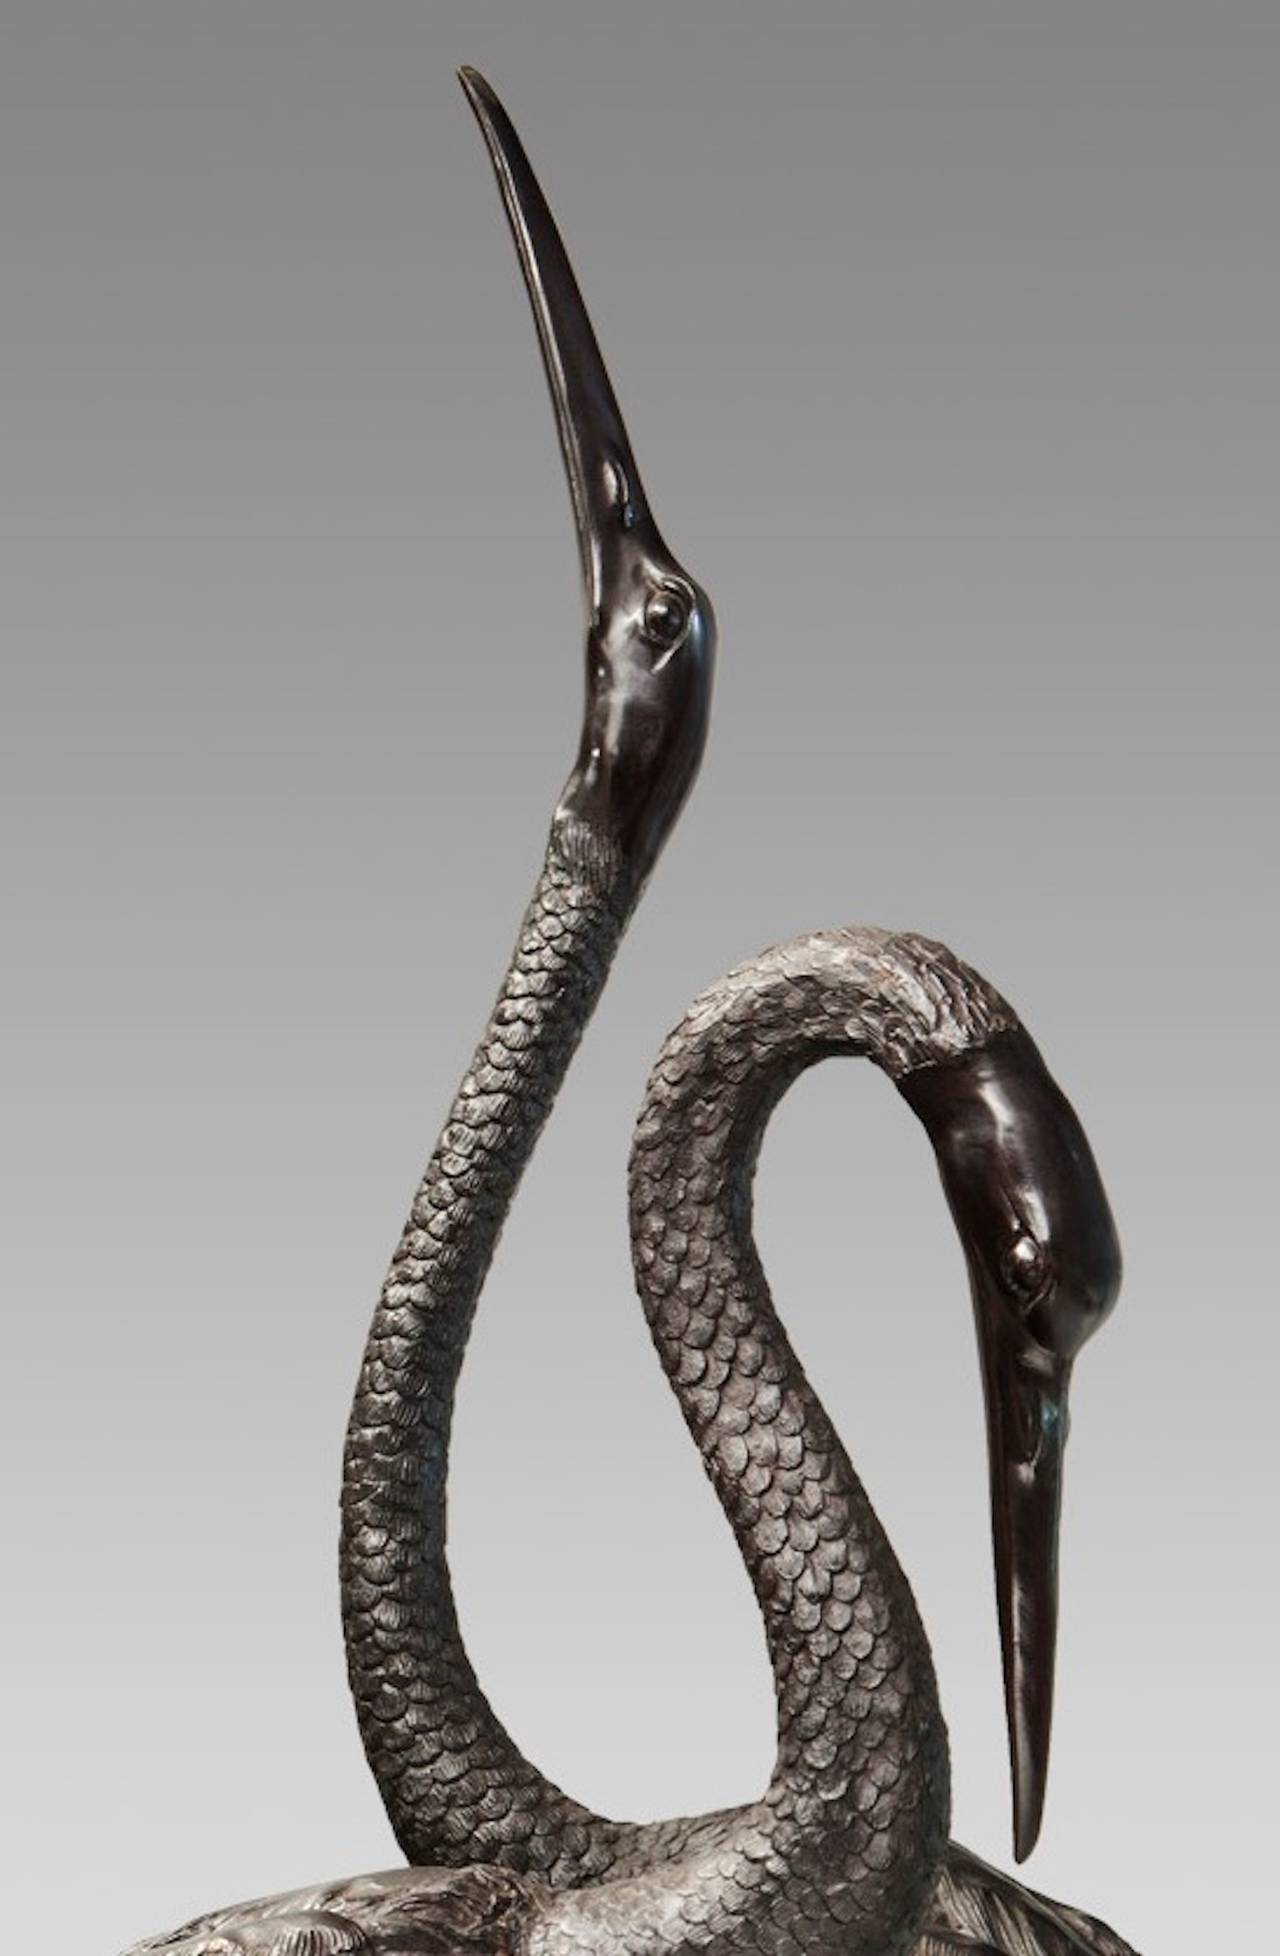 Spectacular and great pair of cranes in Japanese patinated bronze, 20th century. Featuring realistic details of feathers ridged legs and webbed feet.
Measures:
Height: 214 cm. / 165 cm.
Depth: 63 cm. / 65 cm.
Width: 30 cm. / 30 cm.